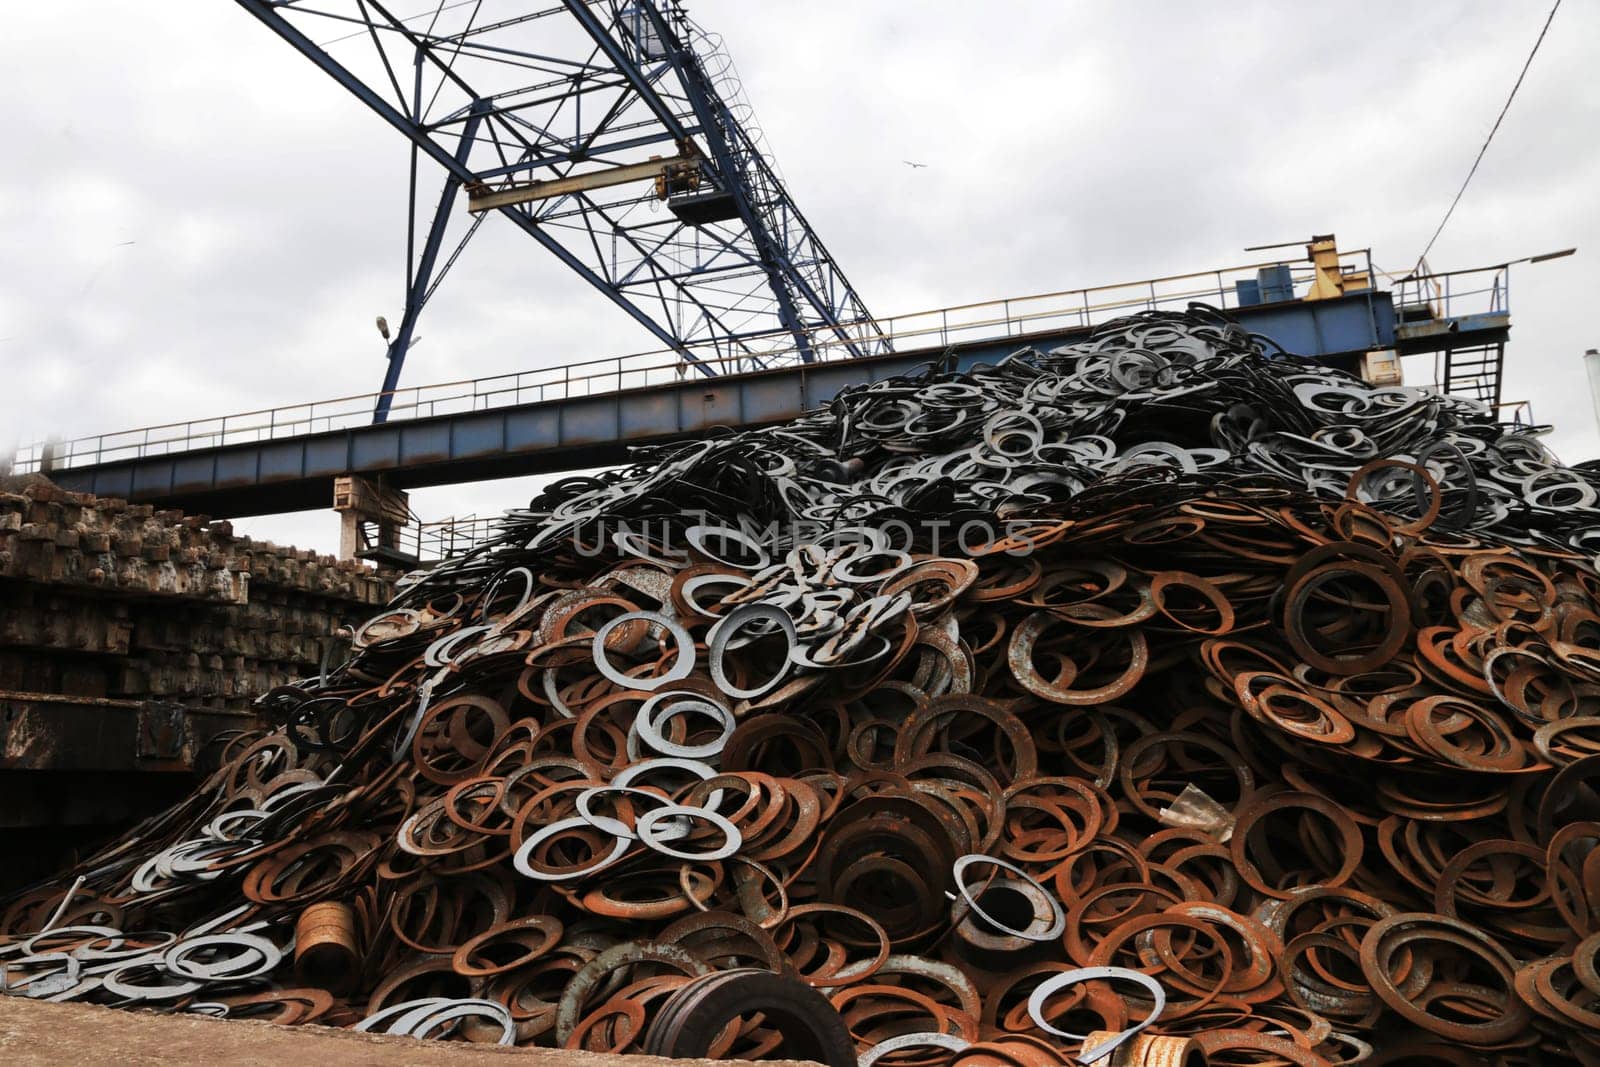 Scrap Metal for Recycling. various forms of rusty metal construction.